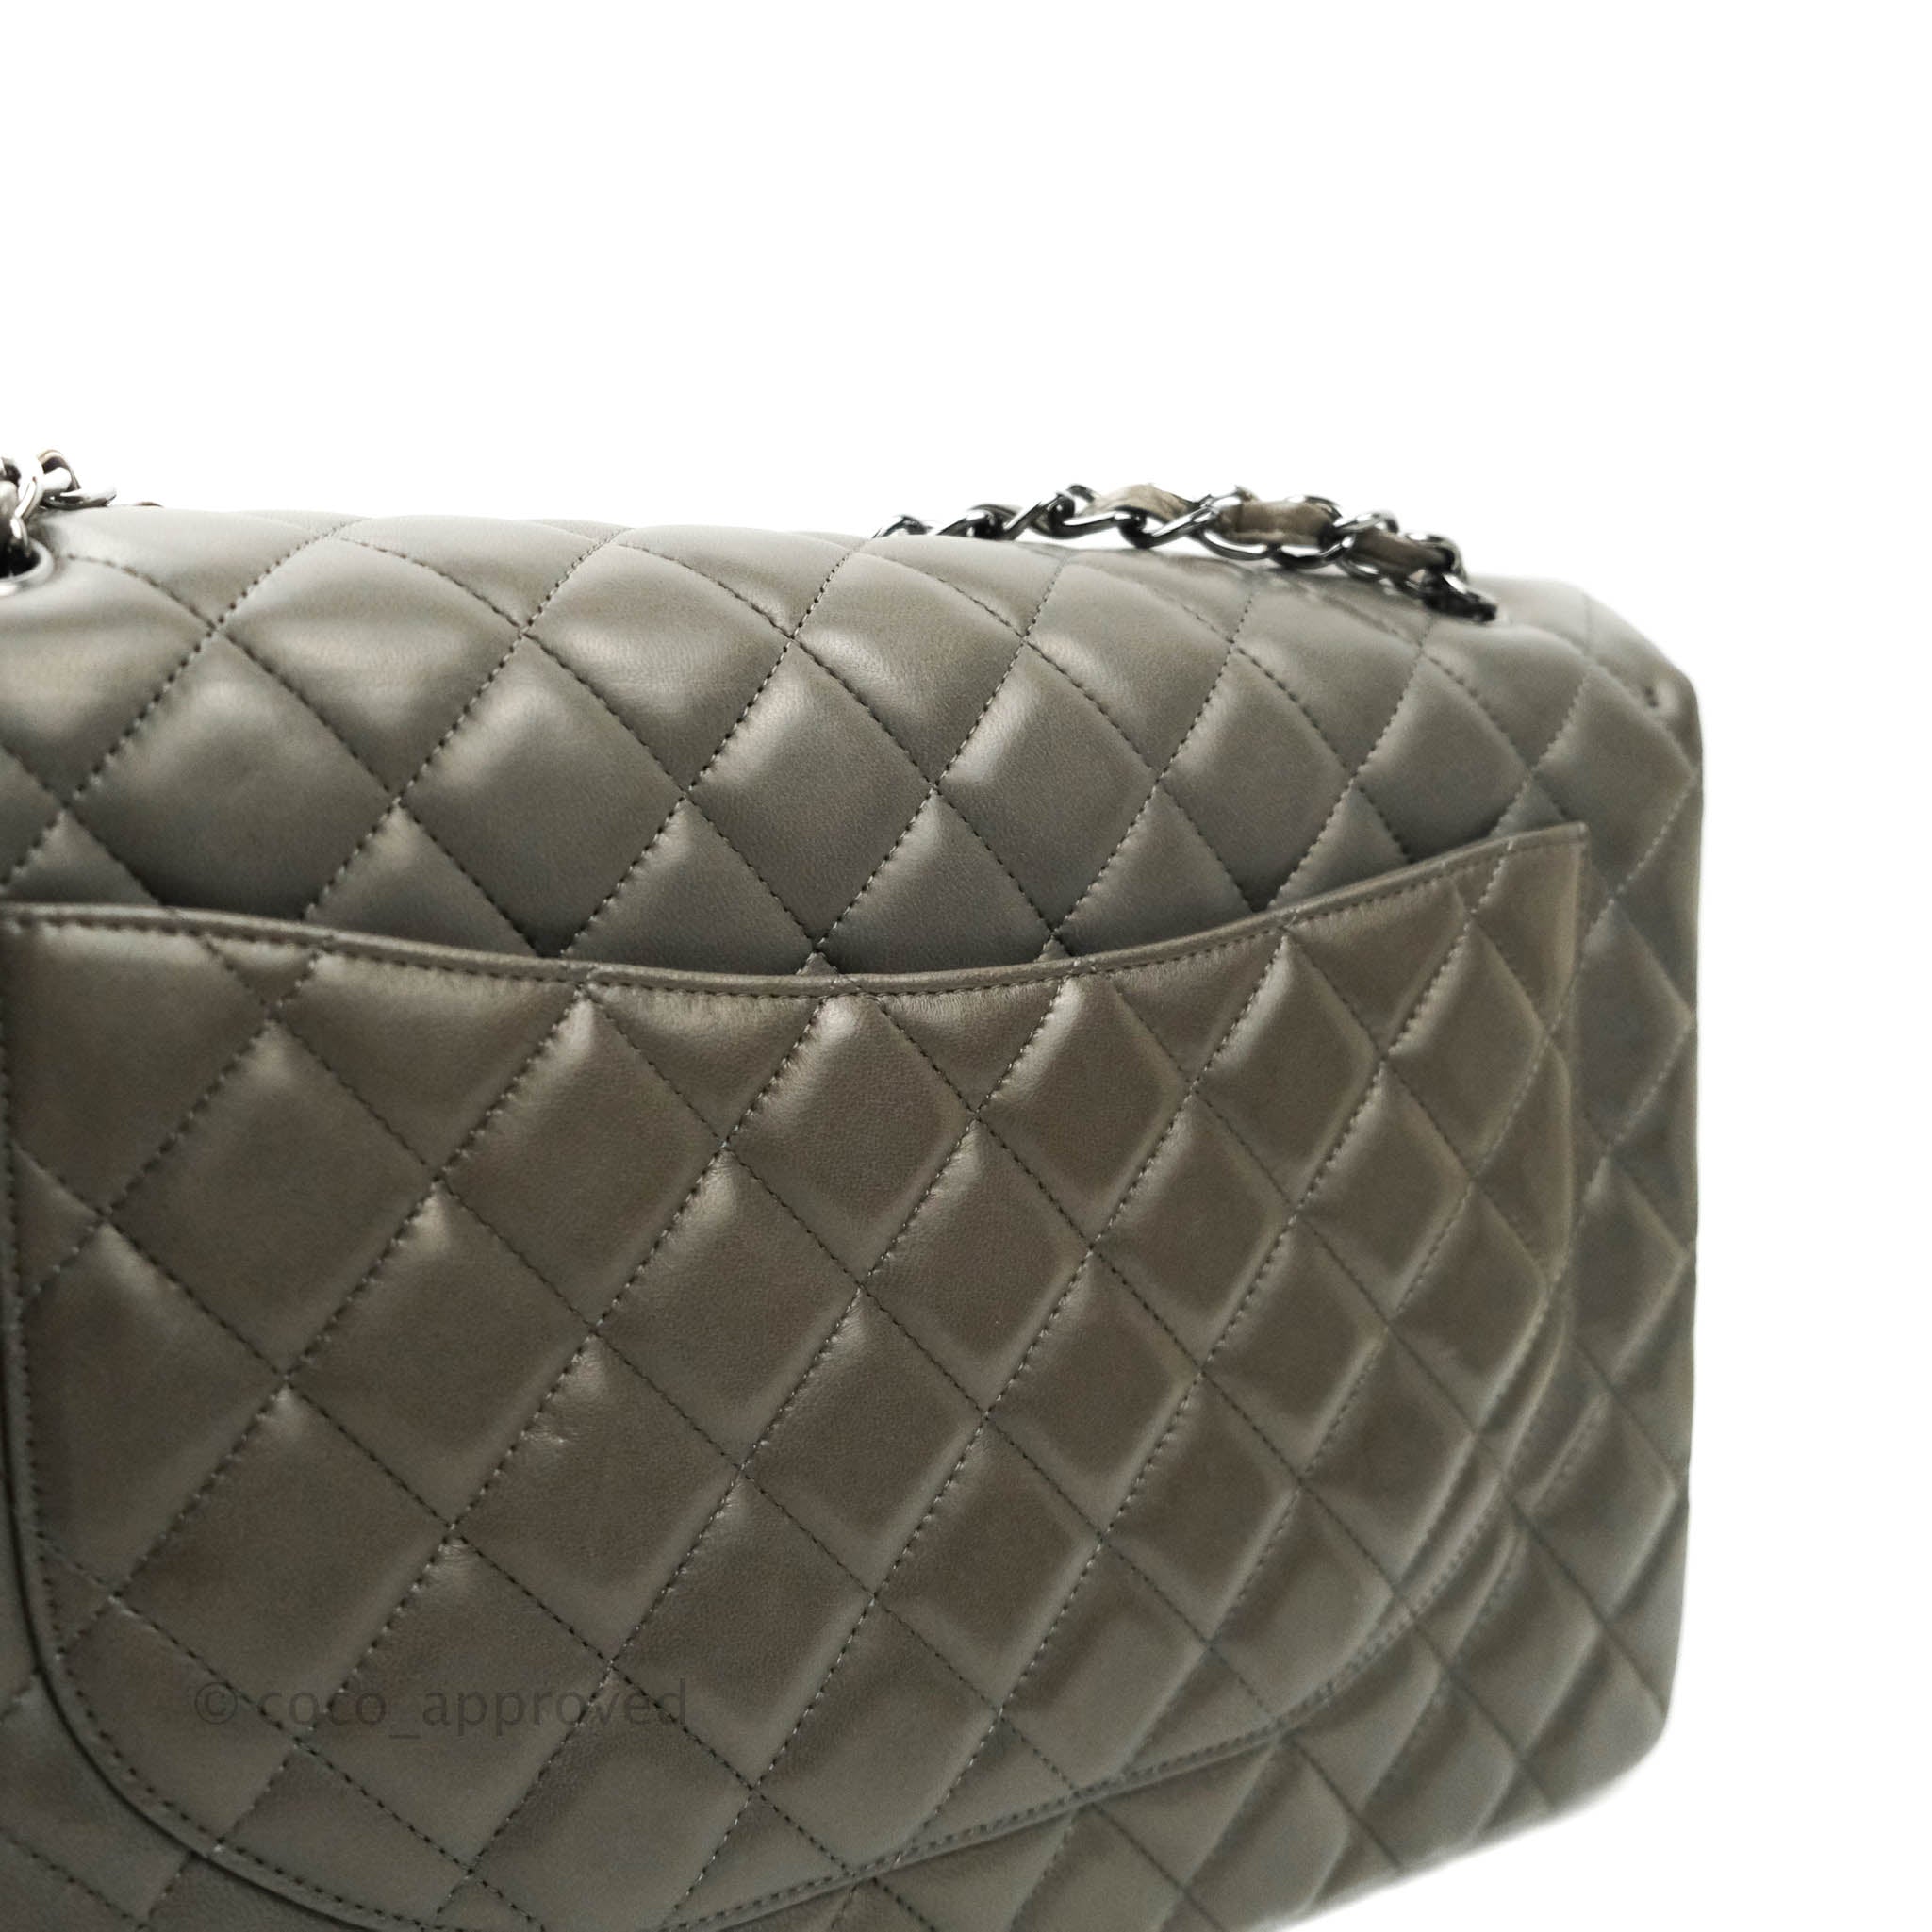 GREY WOOL FABRIC WITH GOLD-TONE METAL CLASSIC SHOULDER BAG, CHANEL, A  Collection of a Lifetime: Chanel Online, Jewellery